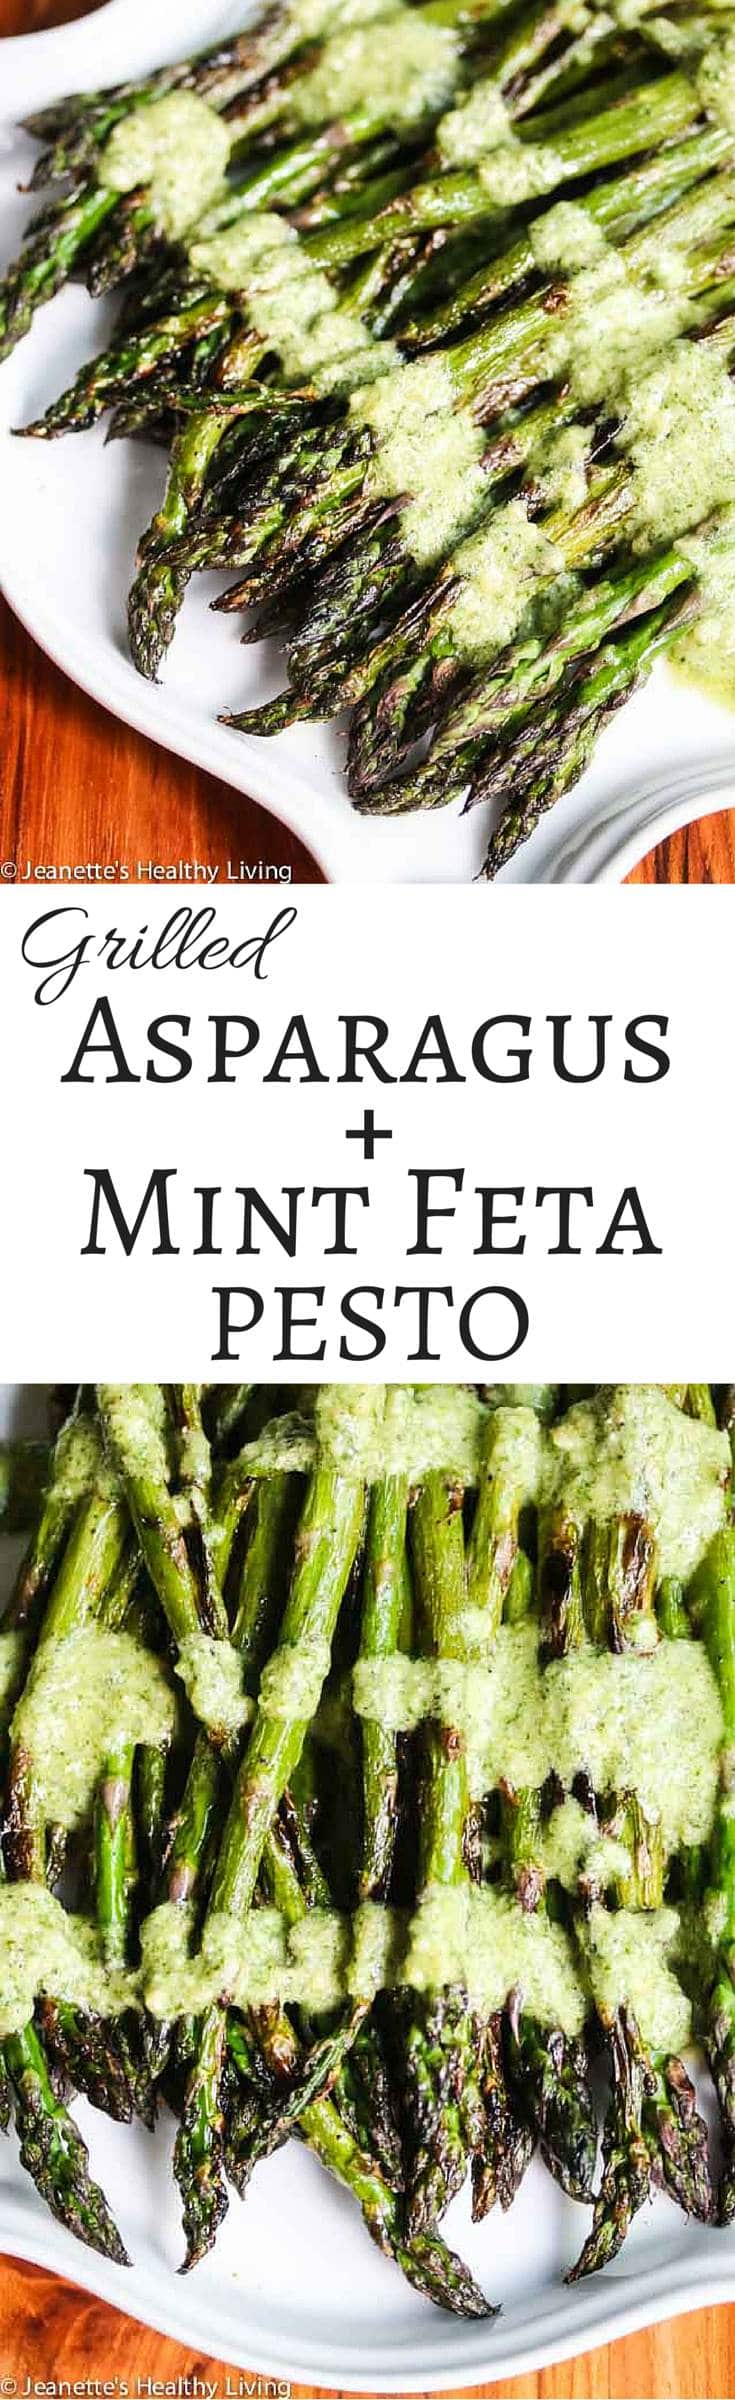 Grilled Asparagus with Mint Feta Pesto - the fresh tangy mint feta topping brings grilled asparagus up a notch.